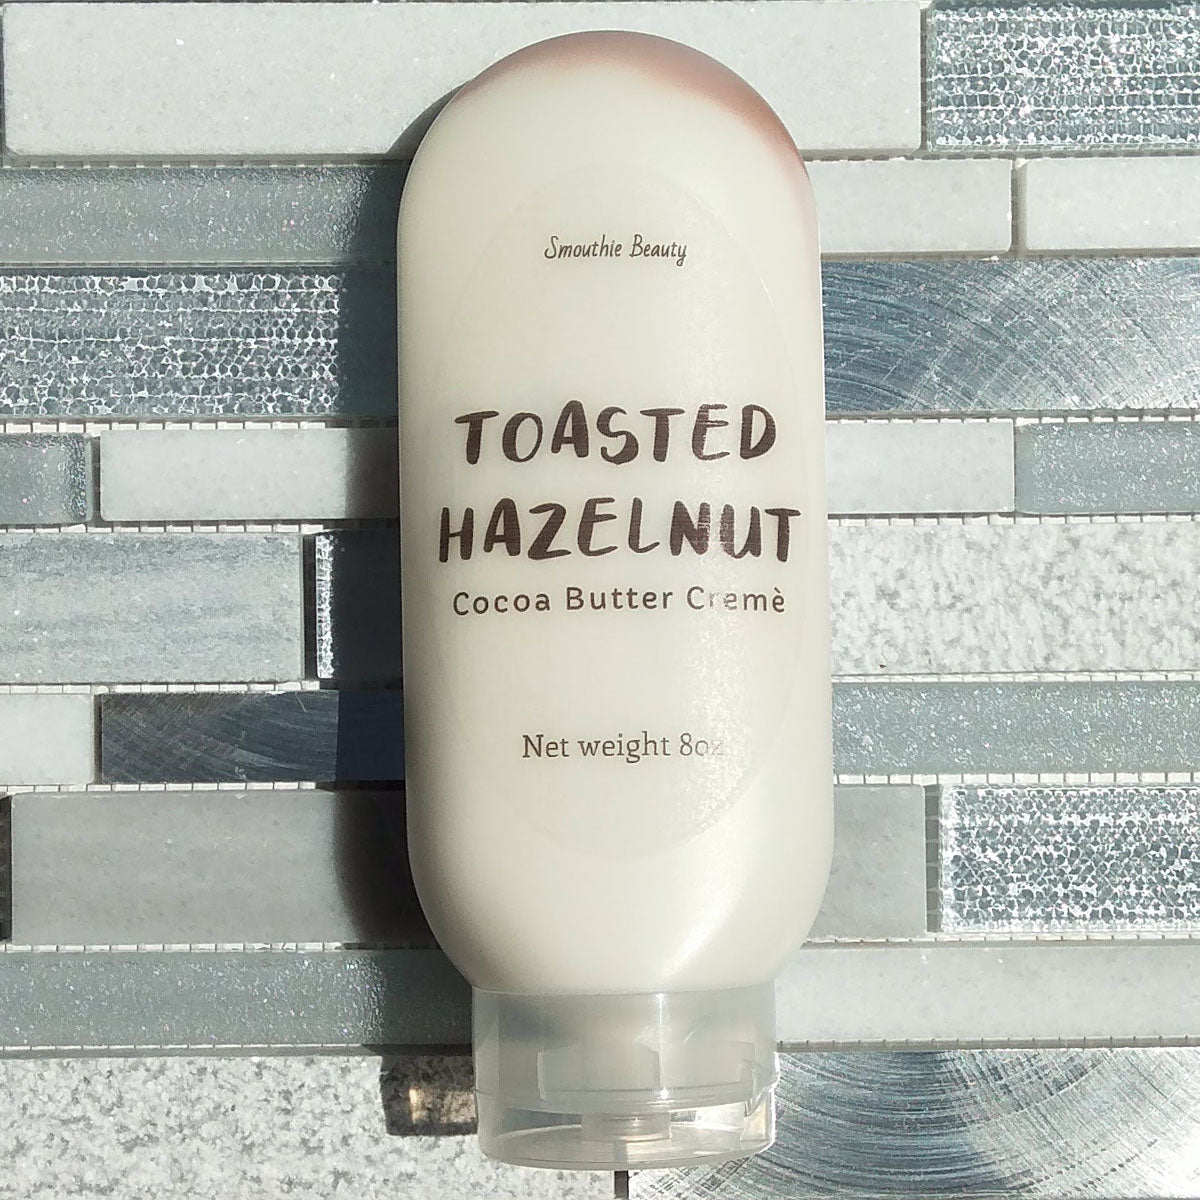 Toasted Hazelnut Cocoa Butter Crème